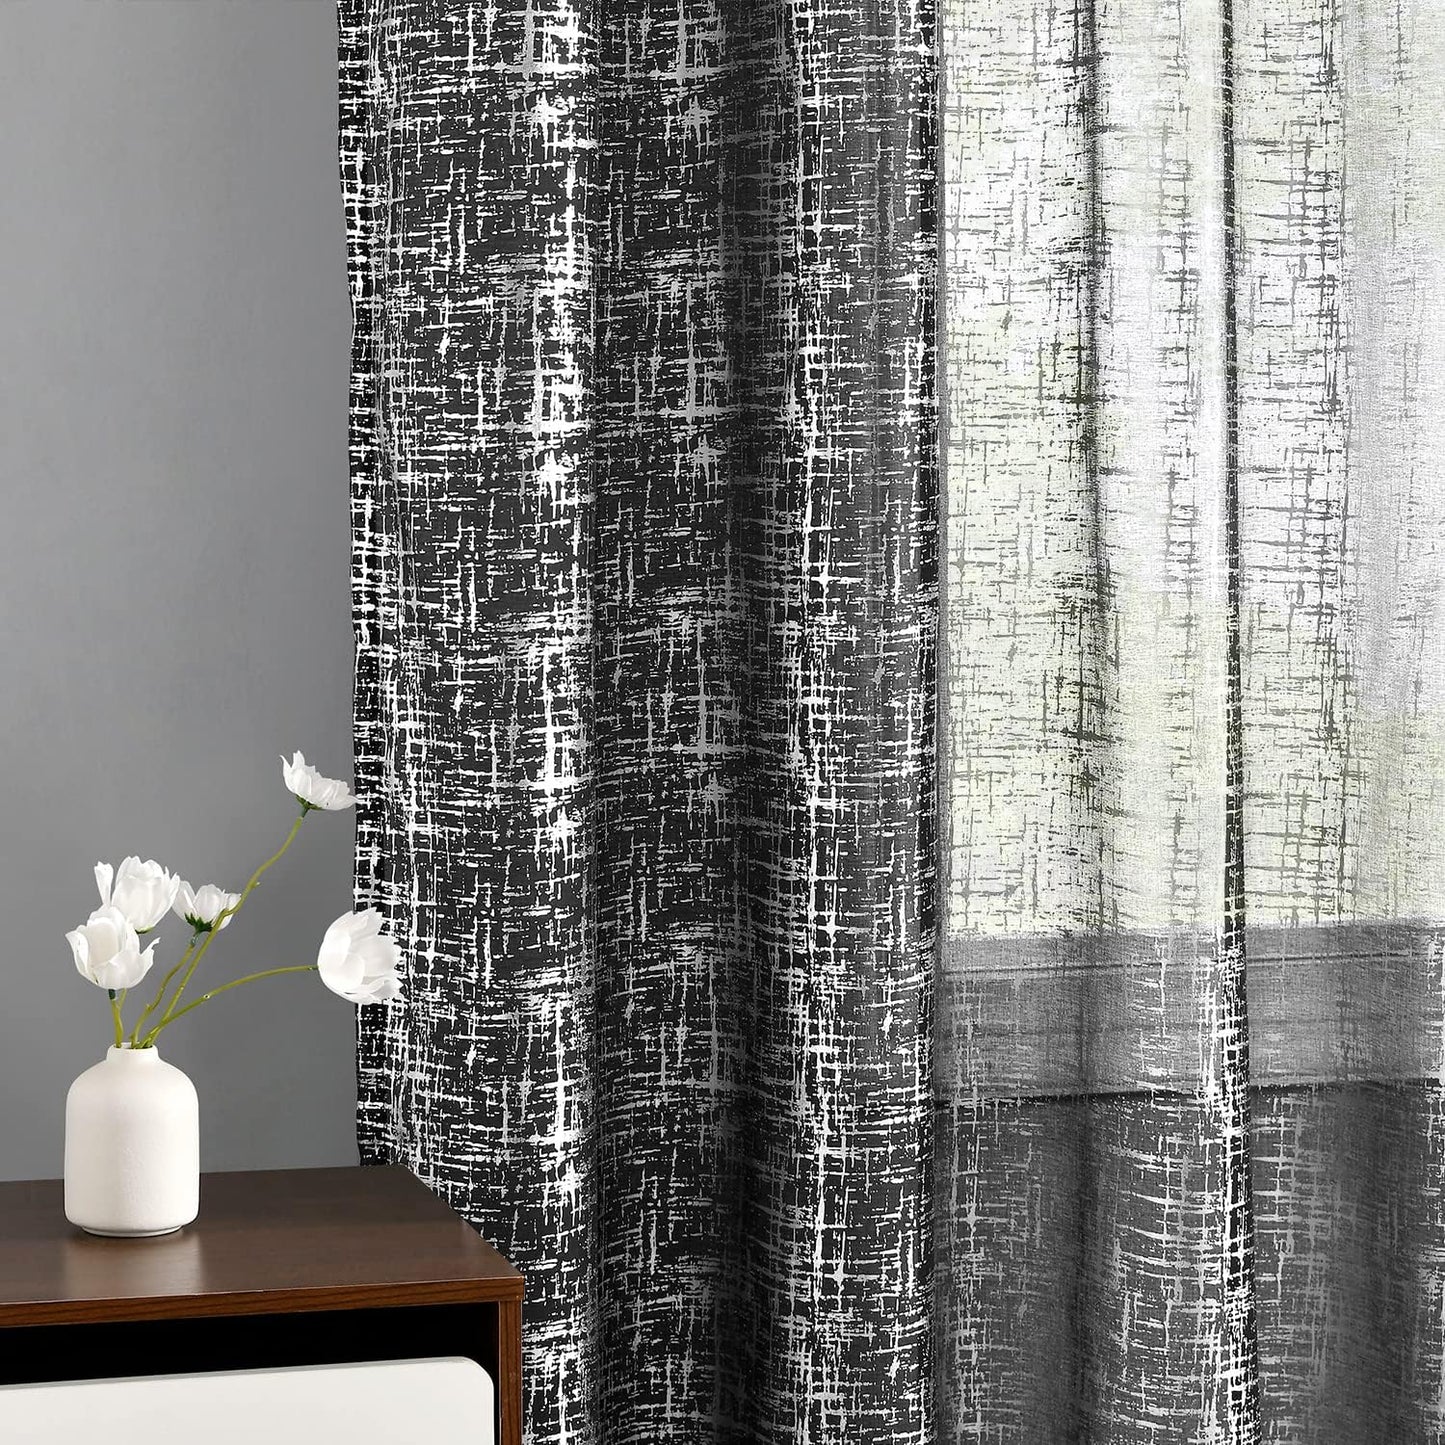 TERLYTEX White Gold Sheer Curtains 84 Inch Length, Metallic Gold Foil Cross Hatch Sparkle Sheer Curtains for Living Room, Rod Pocket Privacy Shimmer Curtains, 52 X 84 Inch, 2 Panels, Gold White  TERLYTEX Silver Black W52 X L84 Inch|Pair 